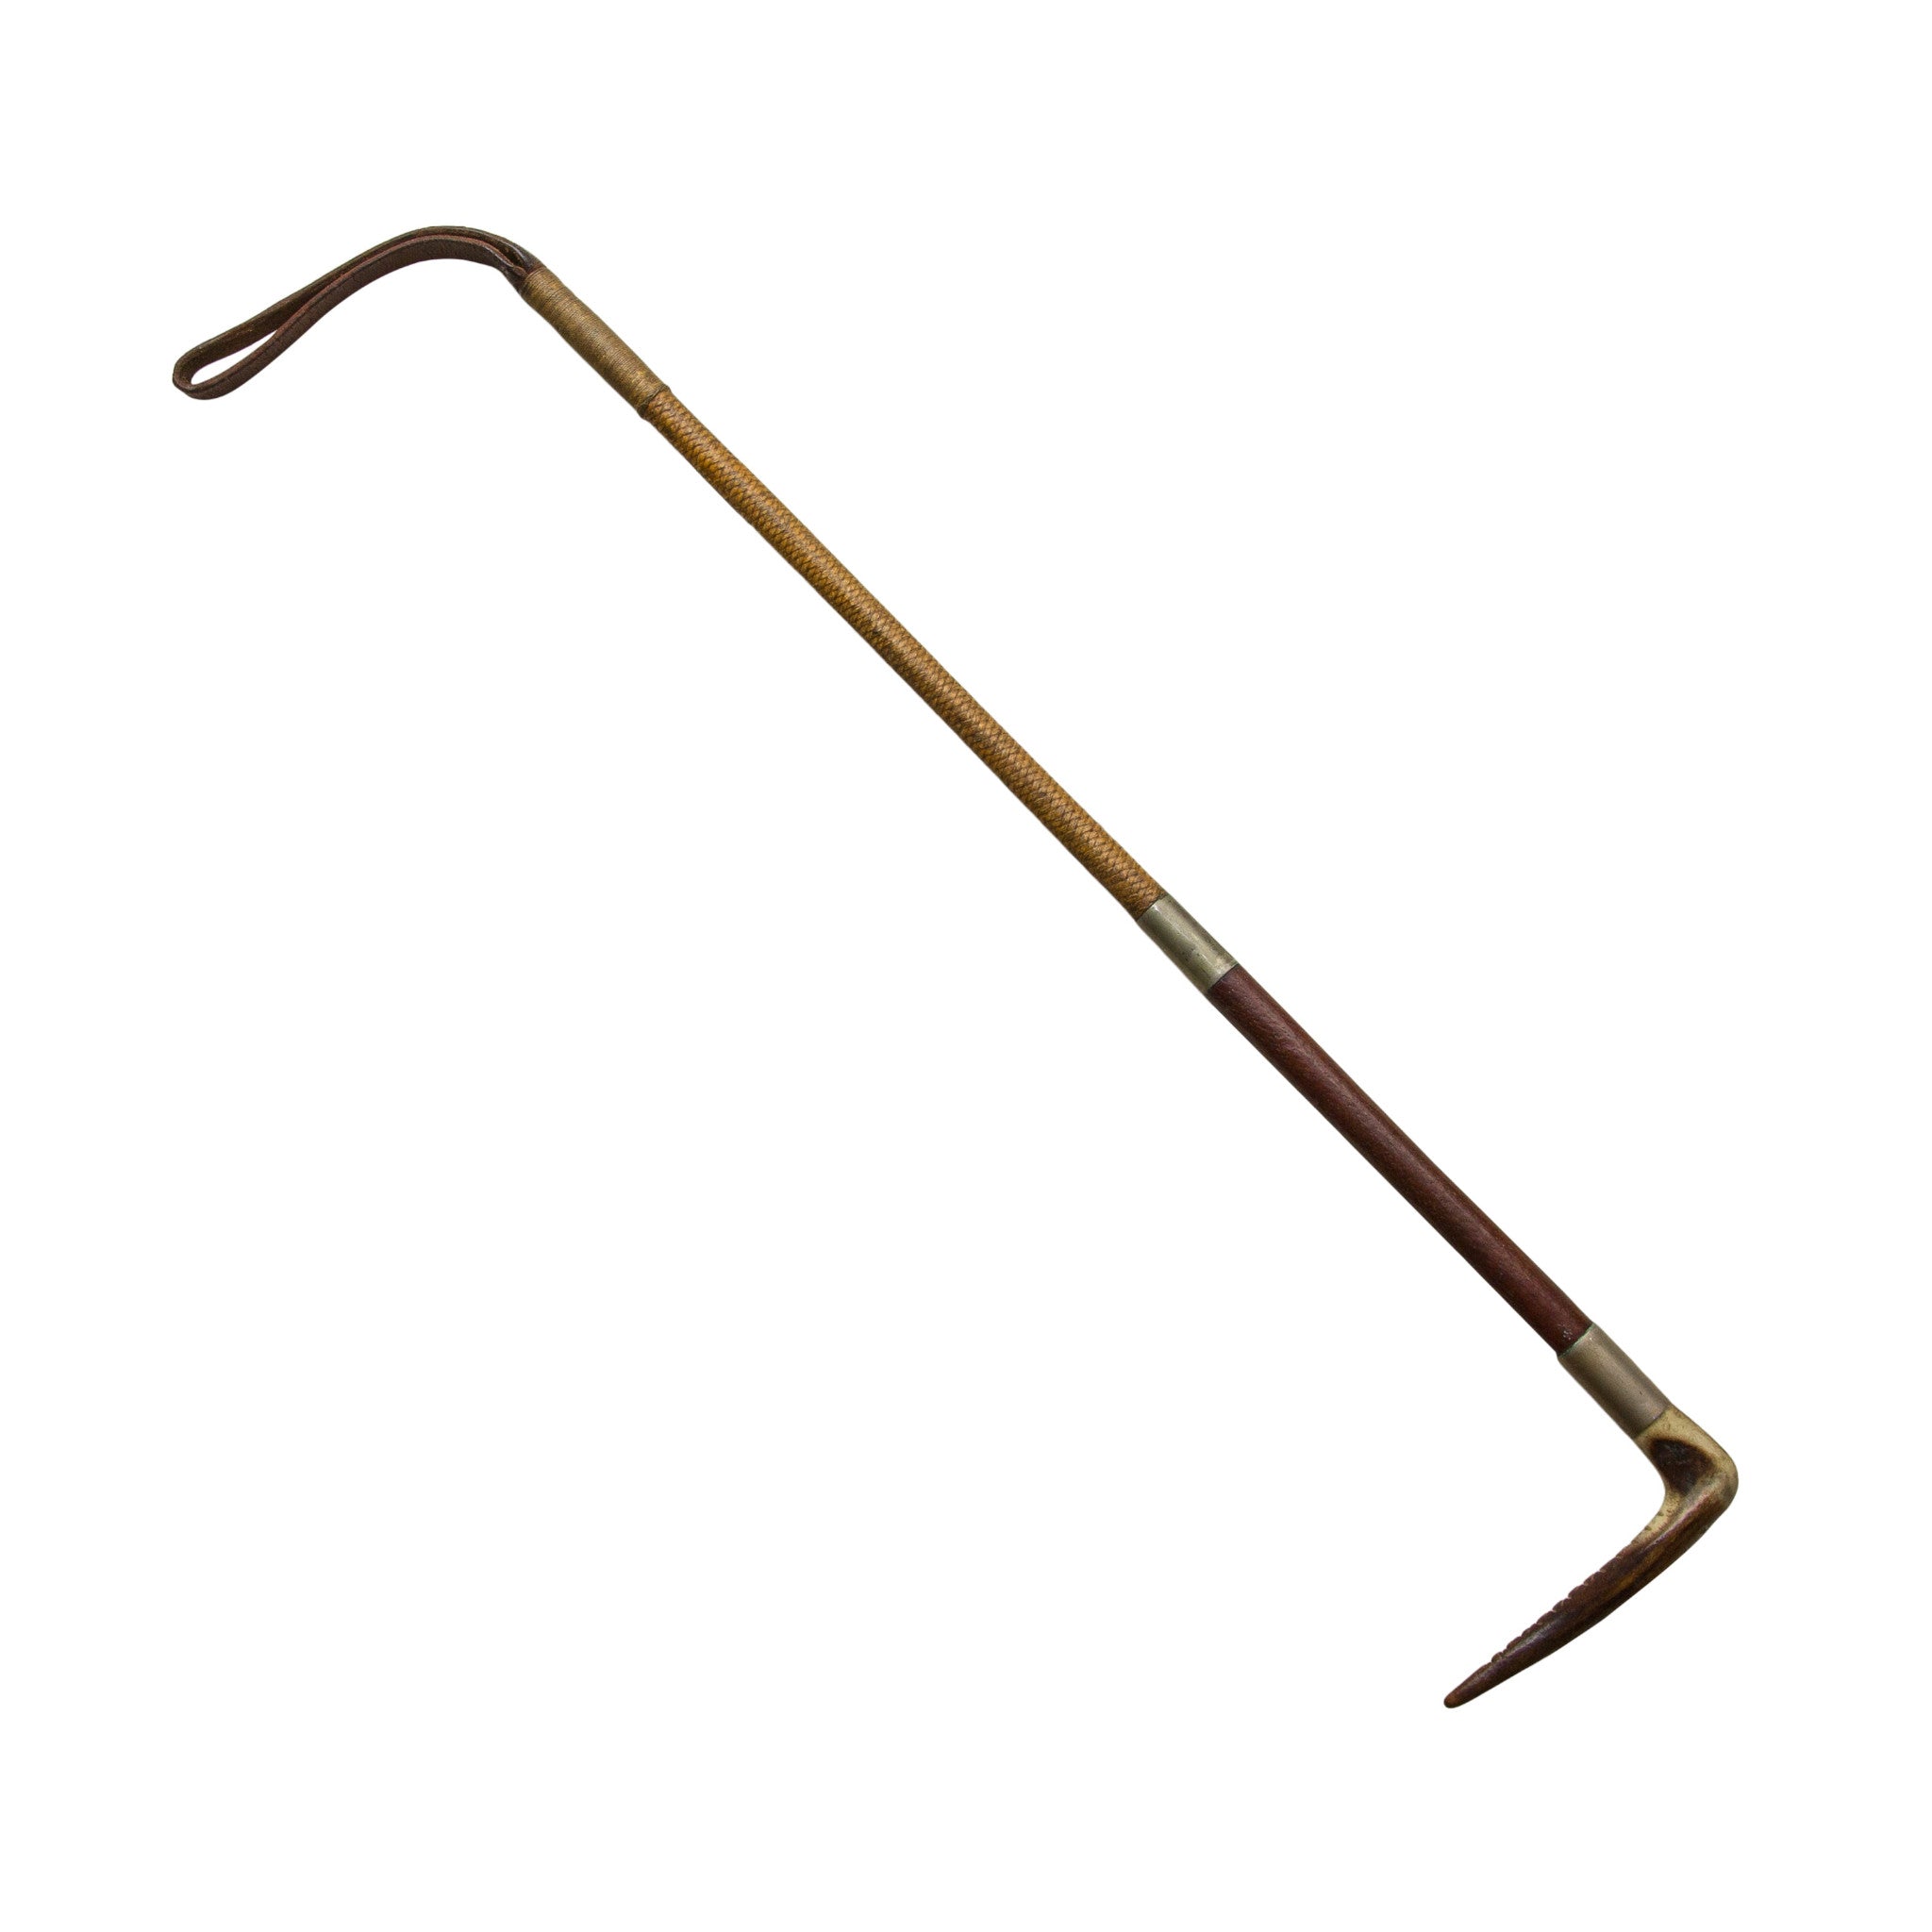 Vintage Ladies Riding Crop with leather and braided shaft